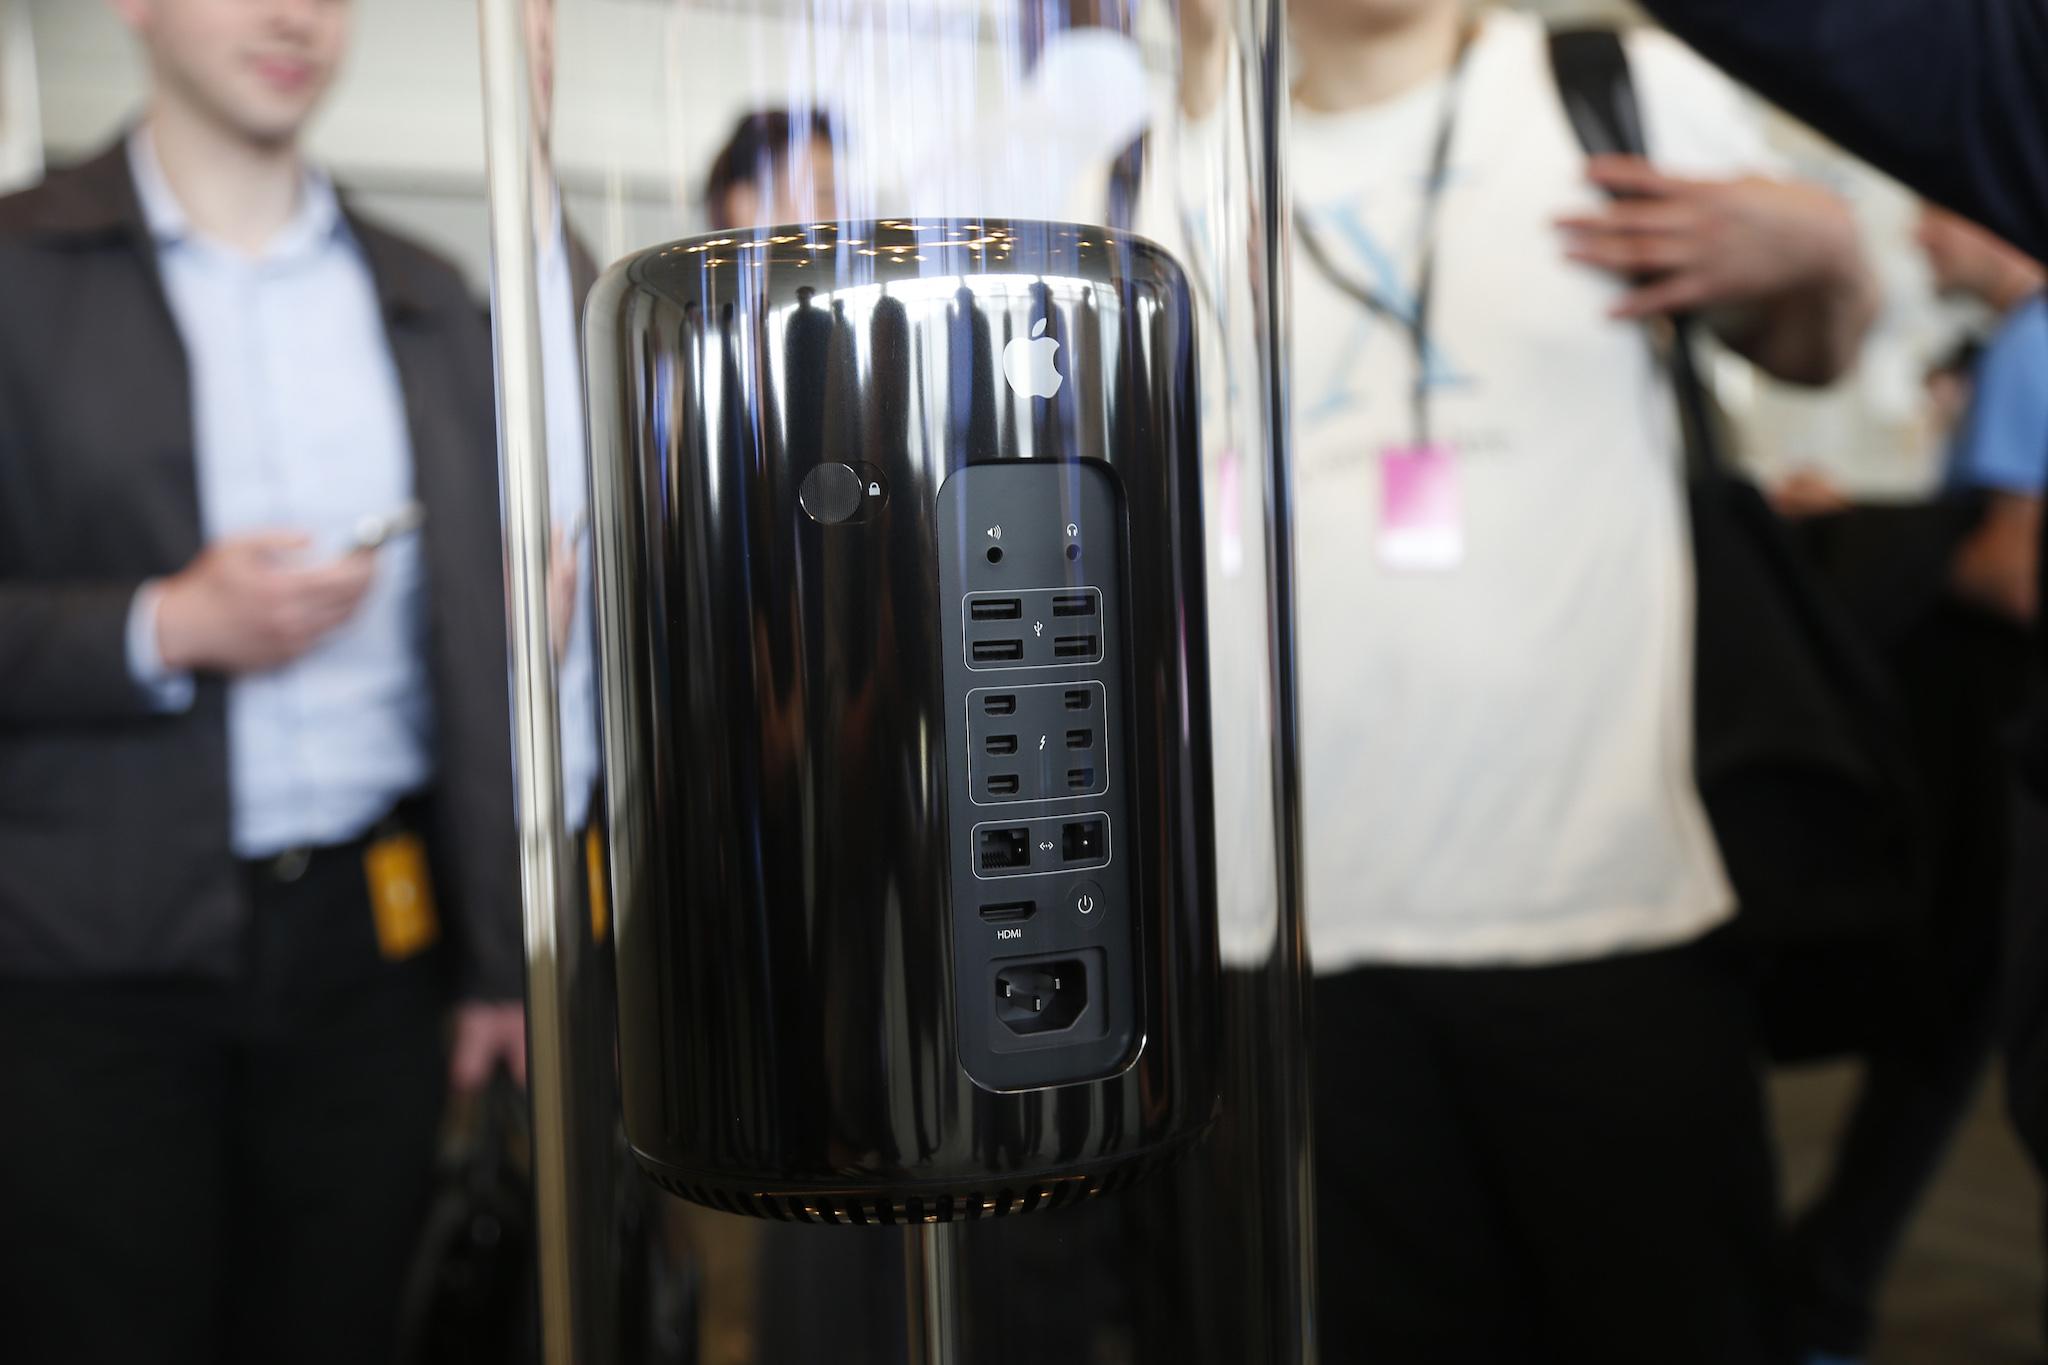 A new Apple Mac Pro on display during the Apple Worldwide Developers Conference (WWDC) 2013 in San Francisco, California June 10, 2013